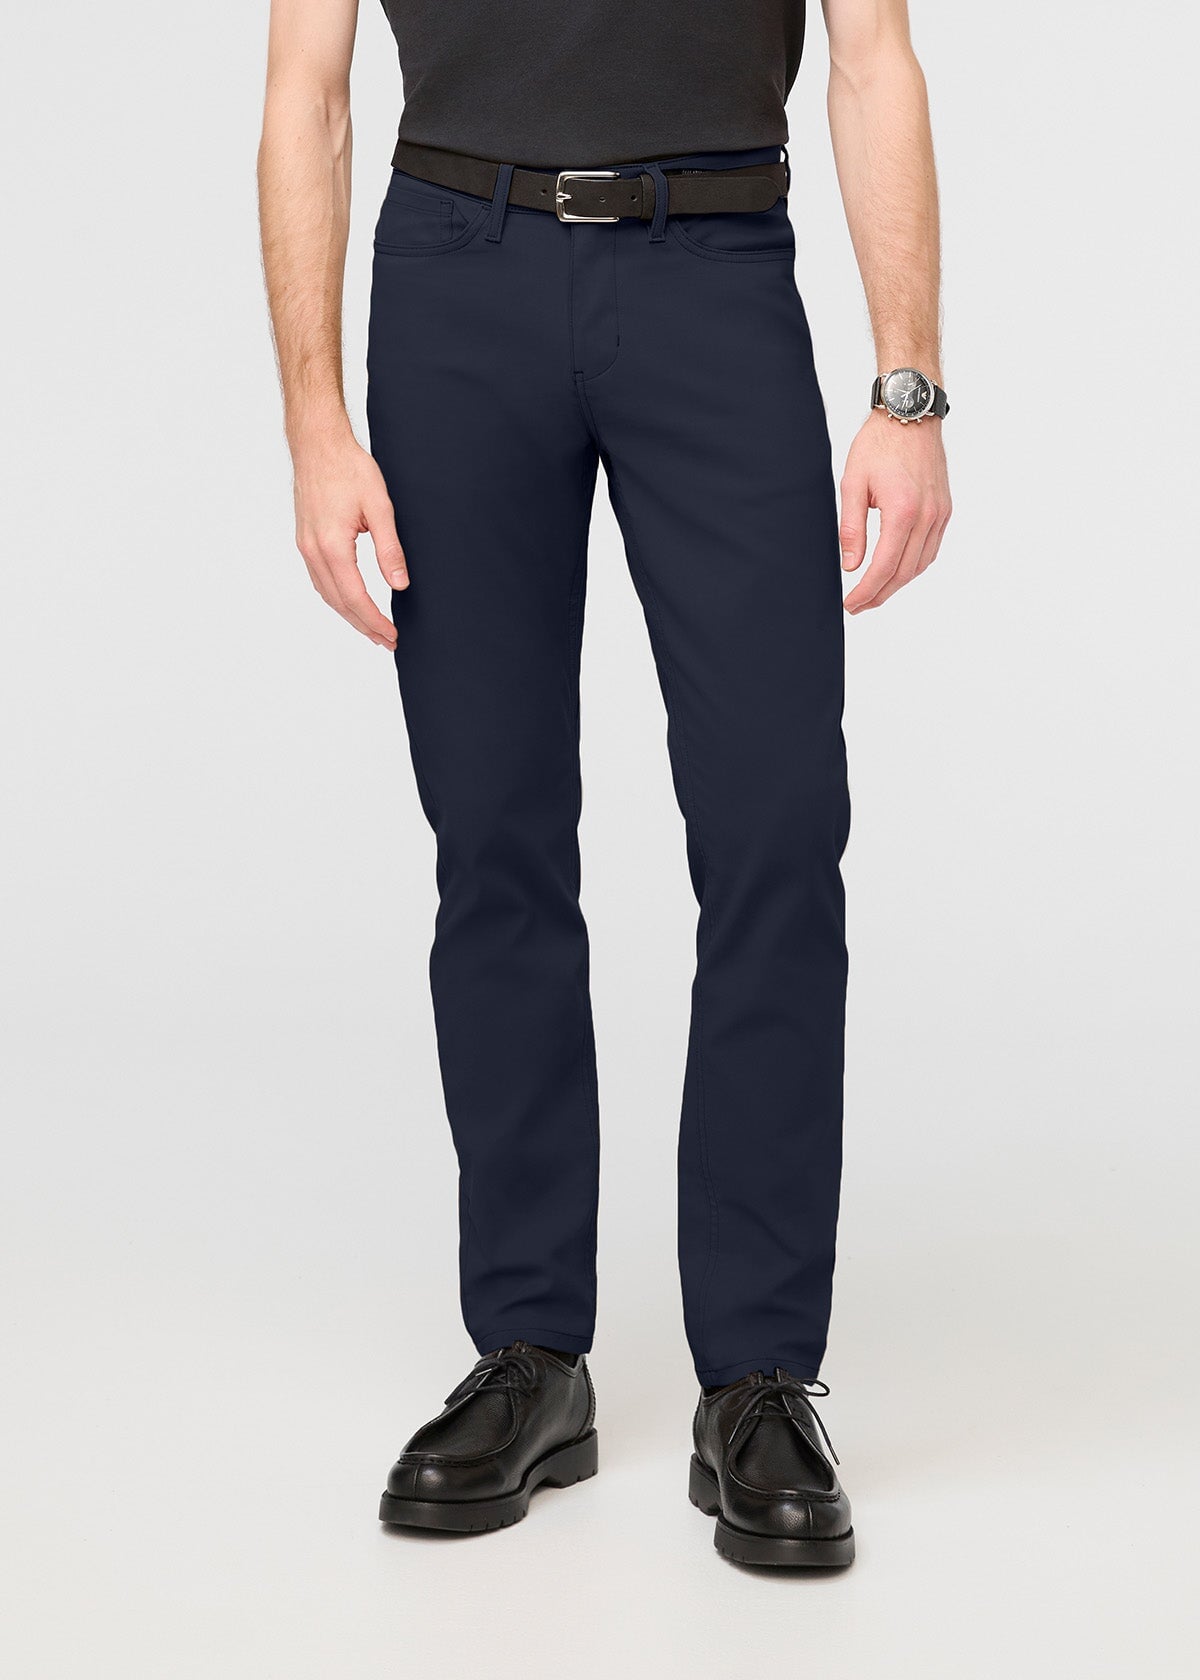 Men's Slim Fit Jeans & Pants - DUER – Tagged 